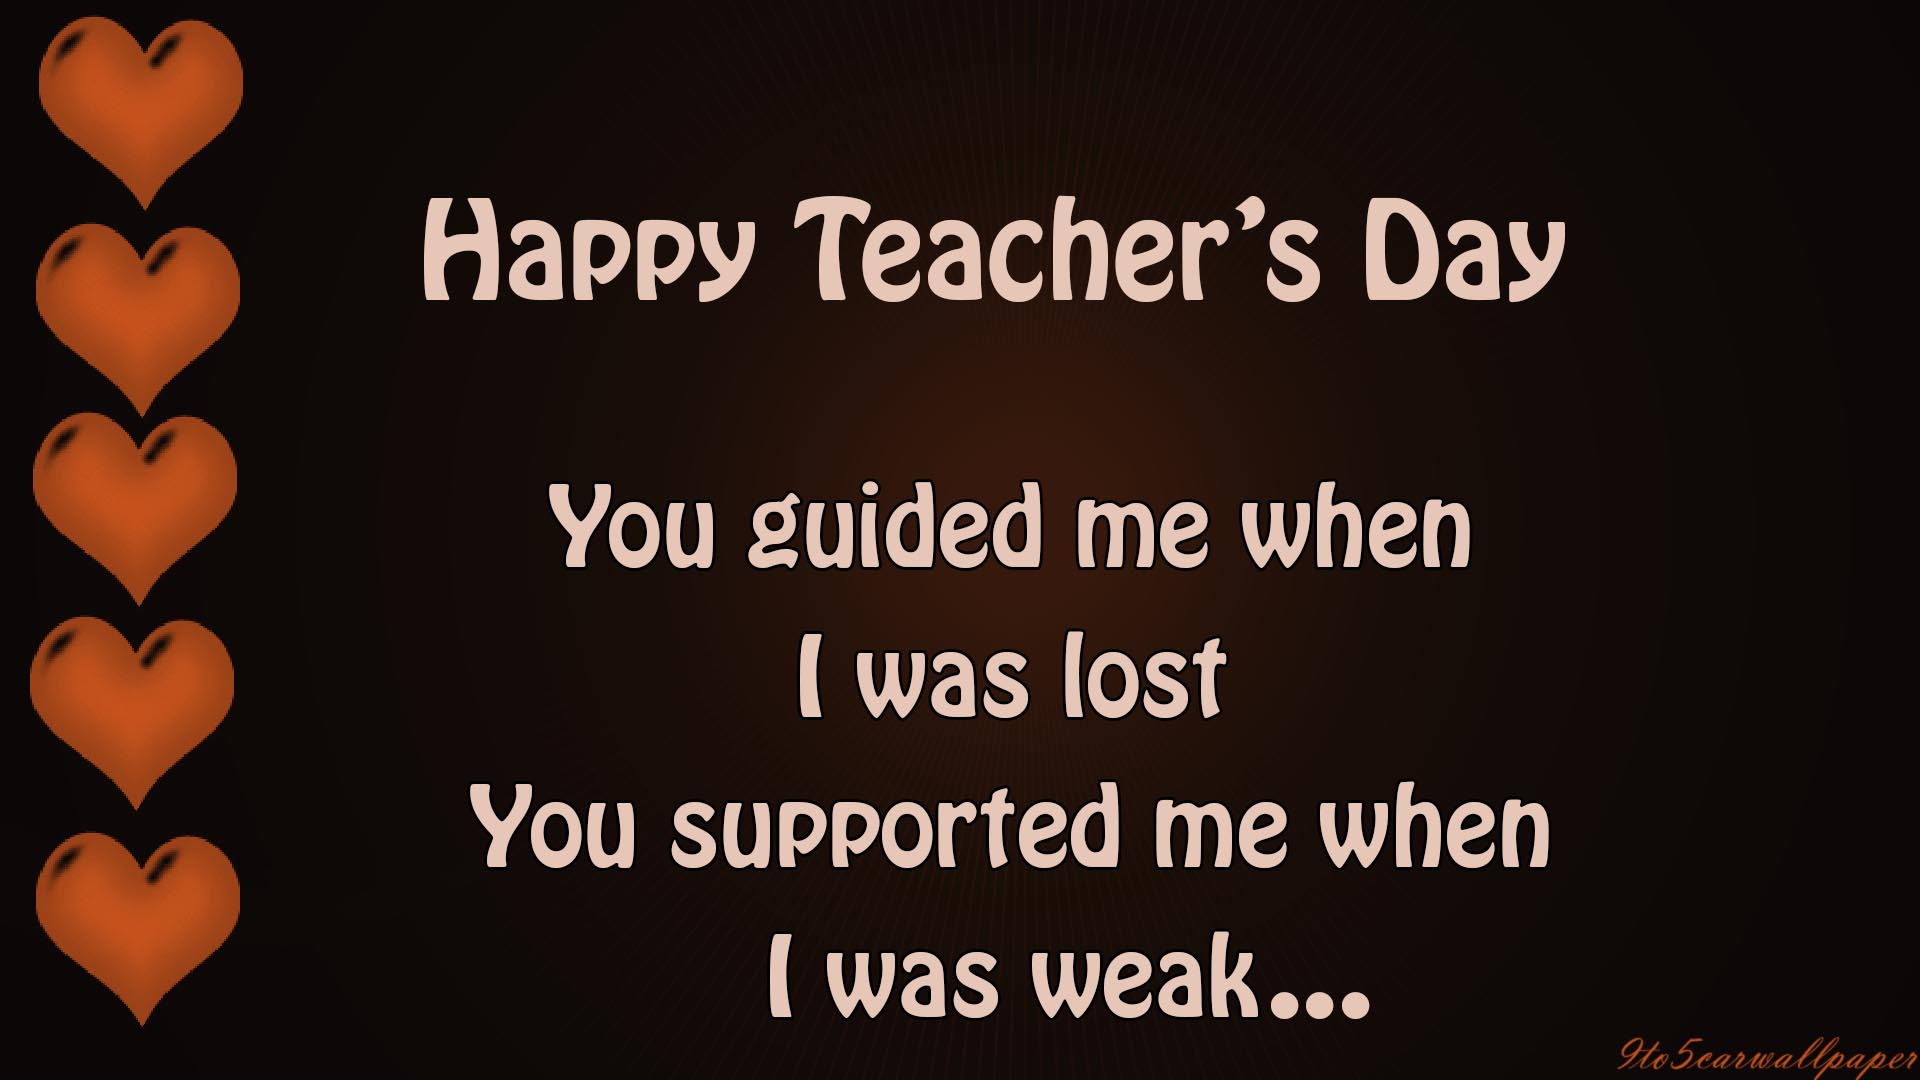 happy-teacher's-day-quotes-images-wallpapers-posters-cards-2017